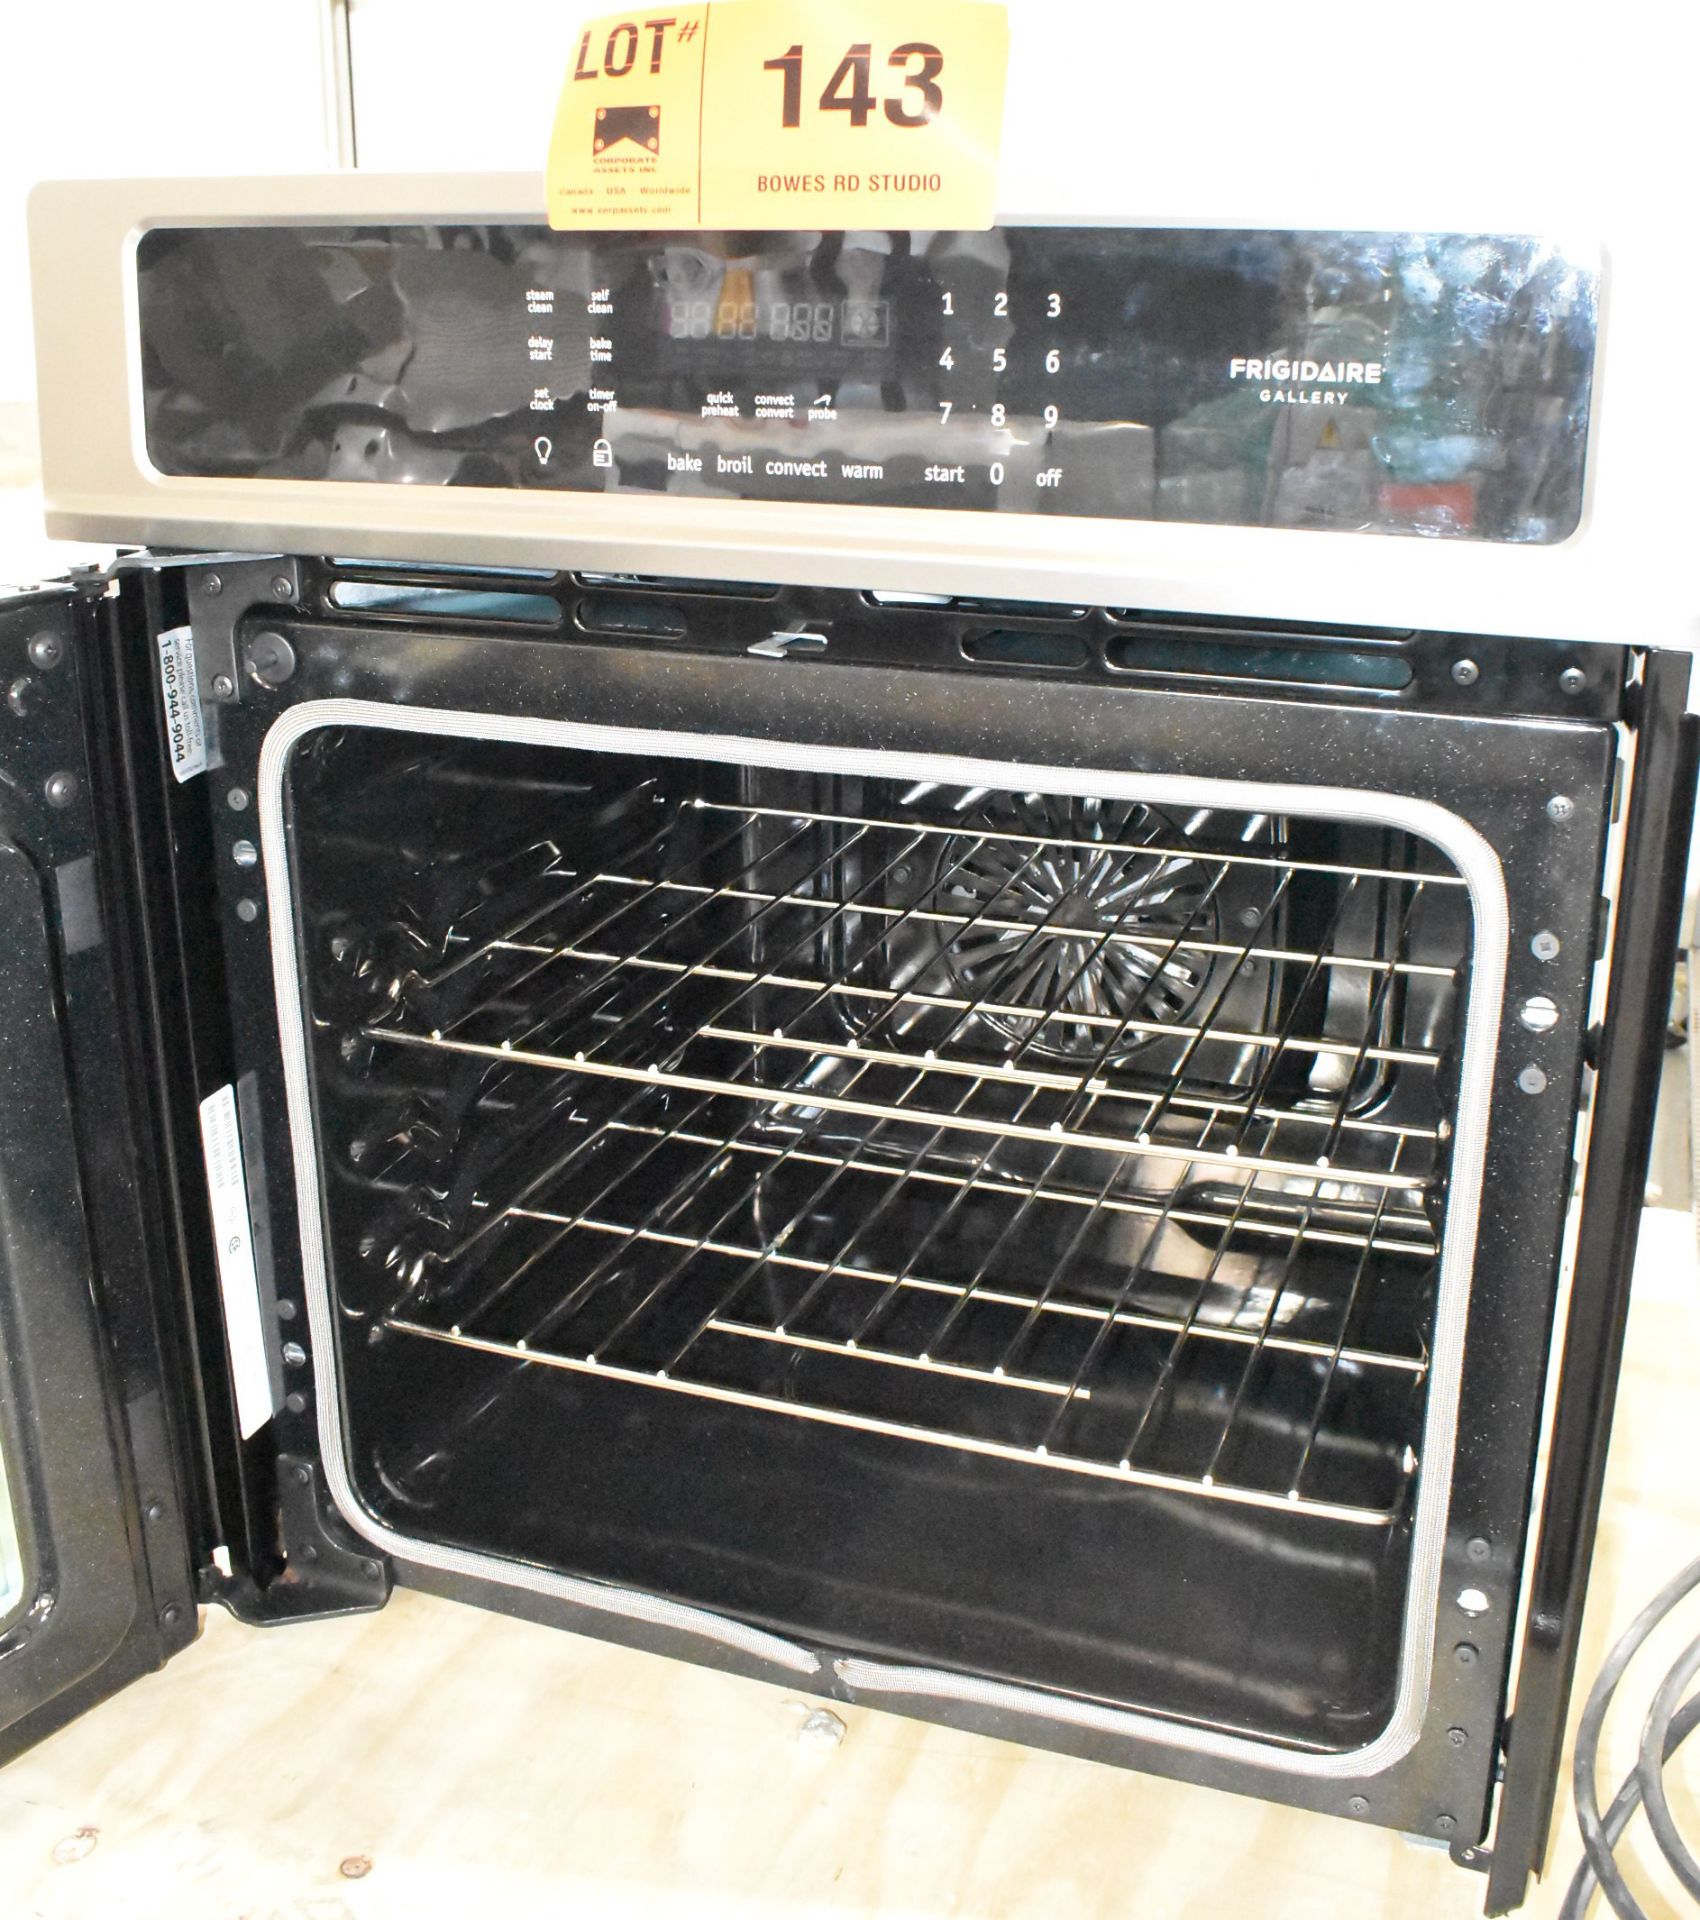 FRIGIDAIRE FGEW276SPFB GALLERY OVEN, S/N AF93103222 [RIGGING FEES FOR LOT #143 - $25 CAD PLUS - Image 5 of 6